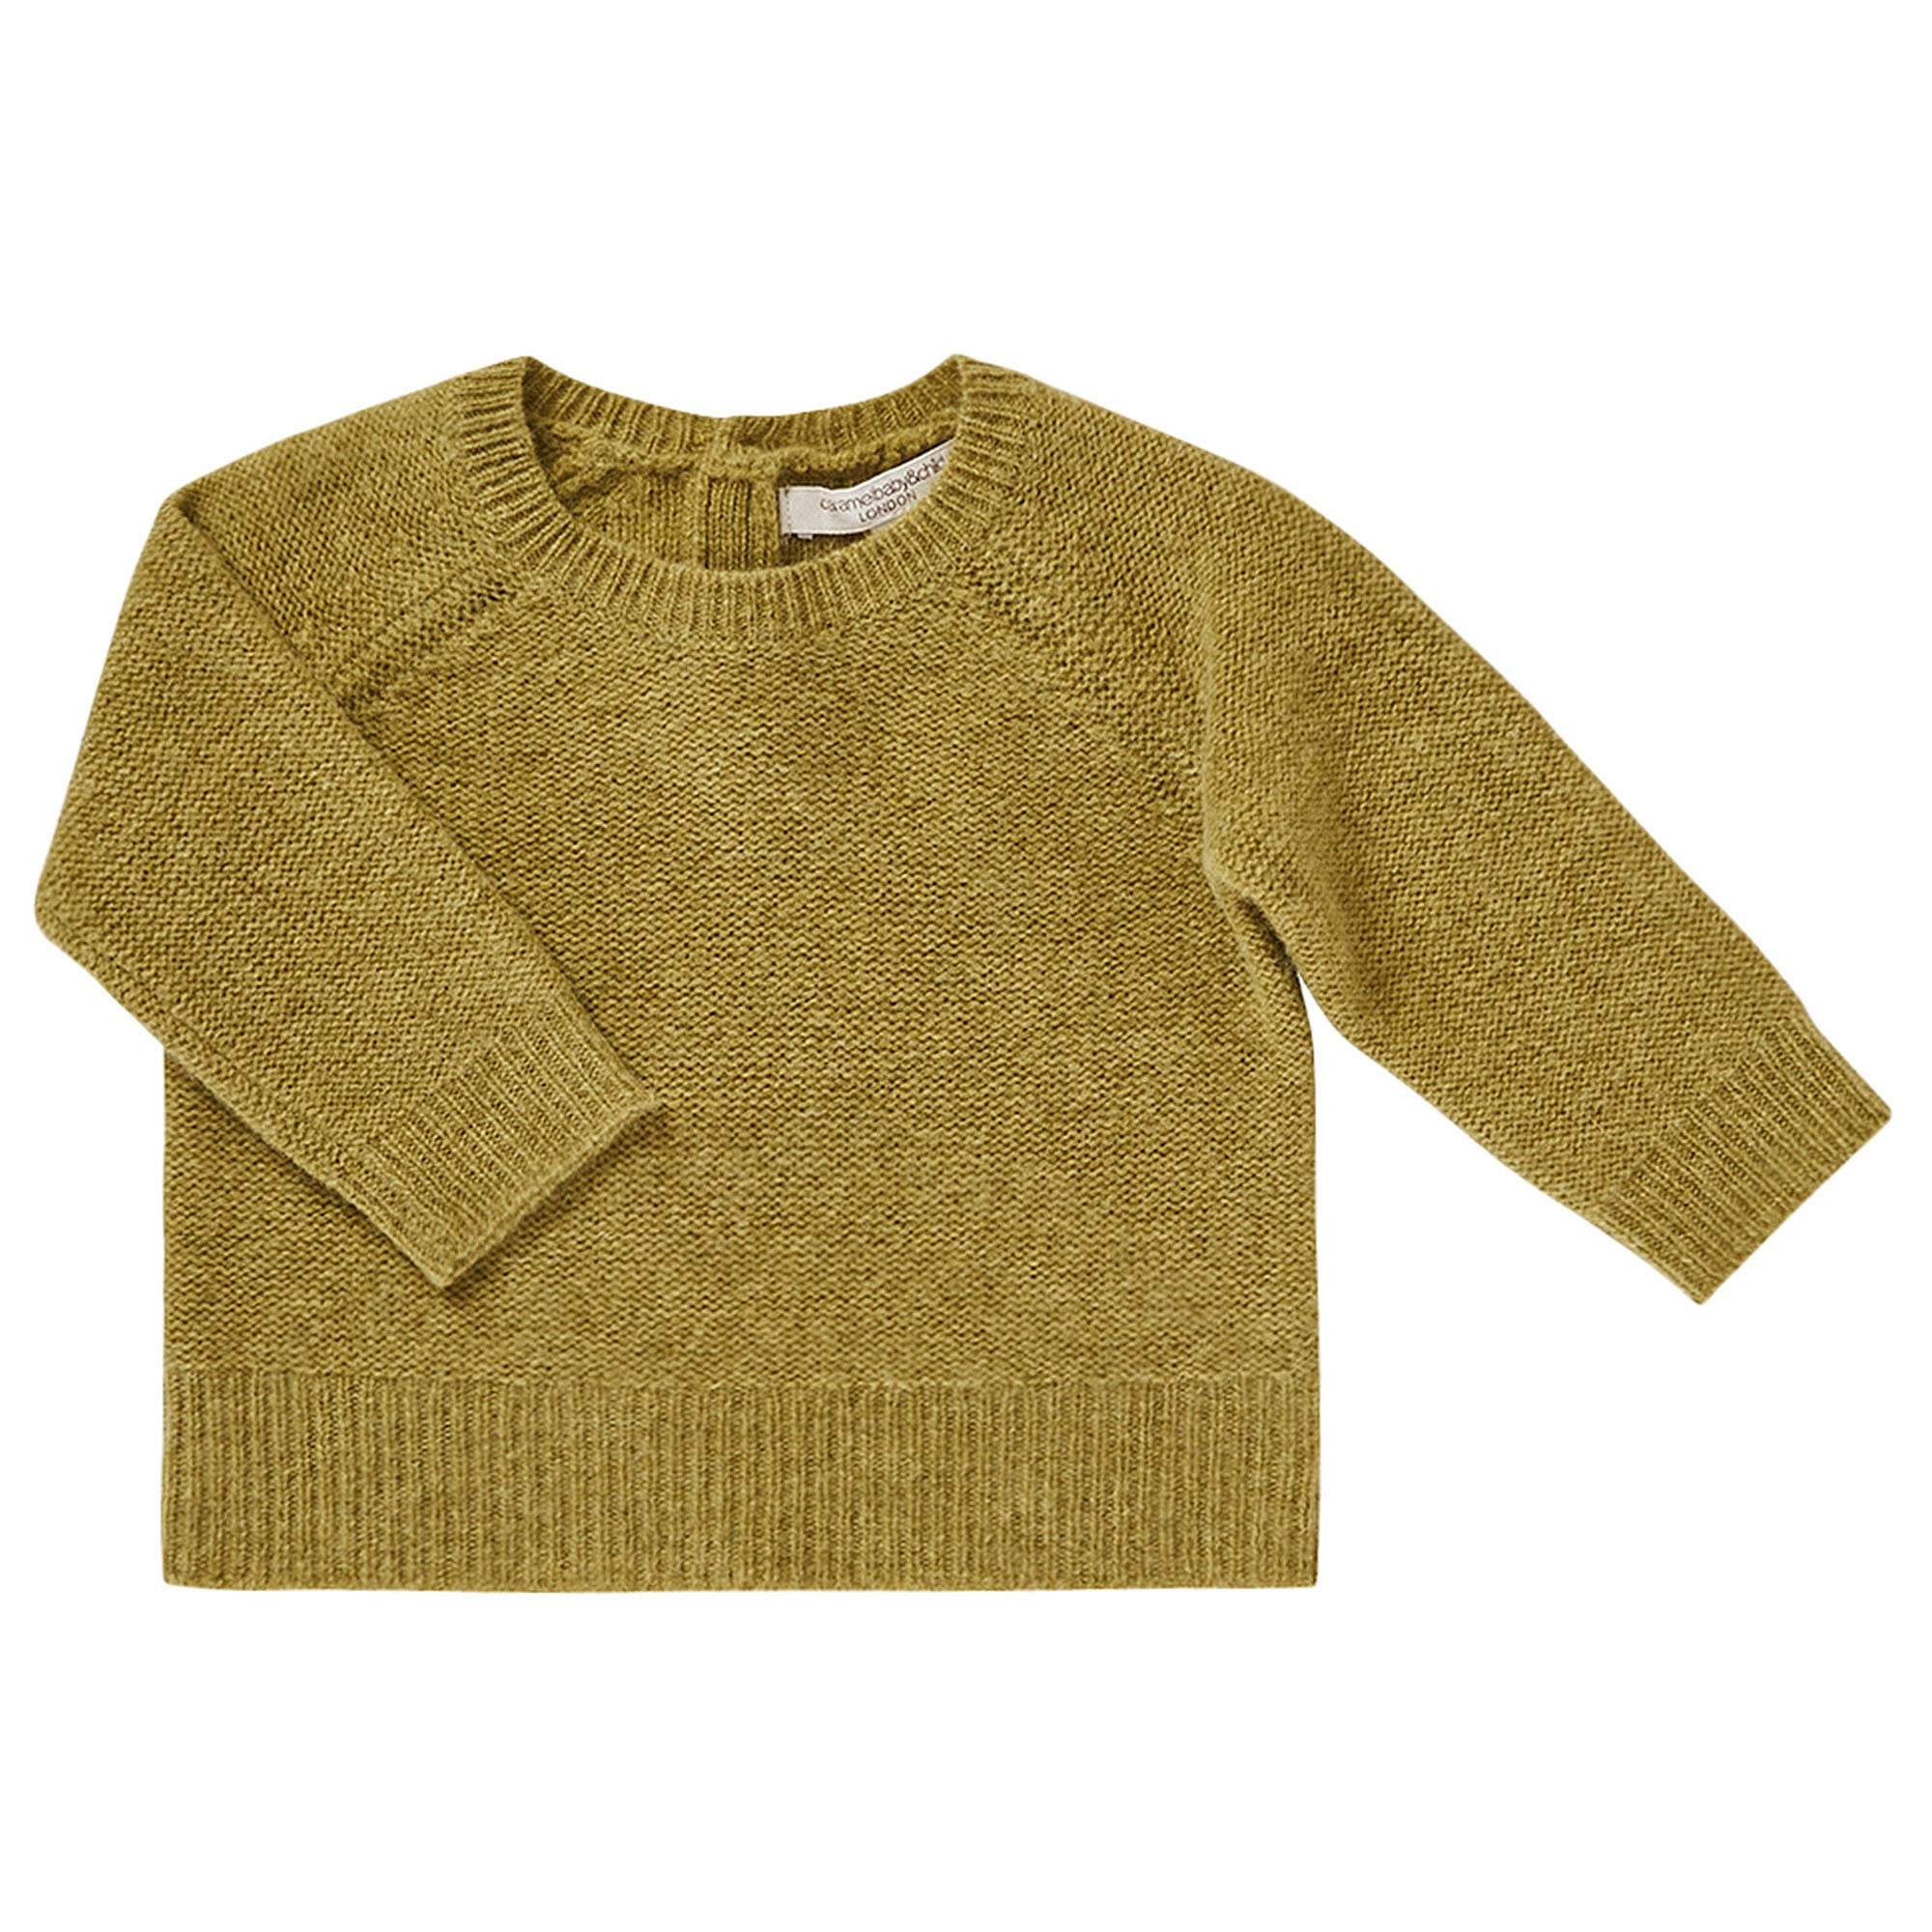 Baby Boys Lime-green Knitted Wool Sweater - CÉMAROSE | Children's Fashion Store - 1